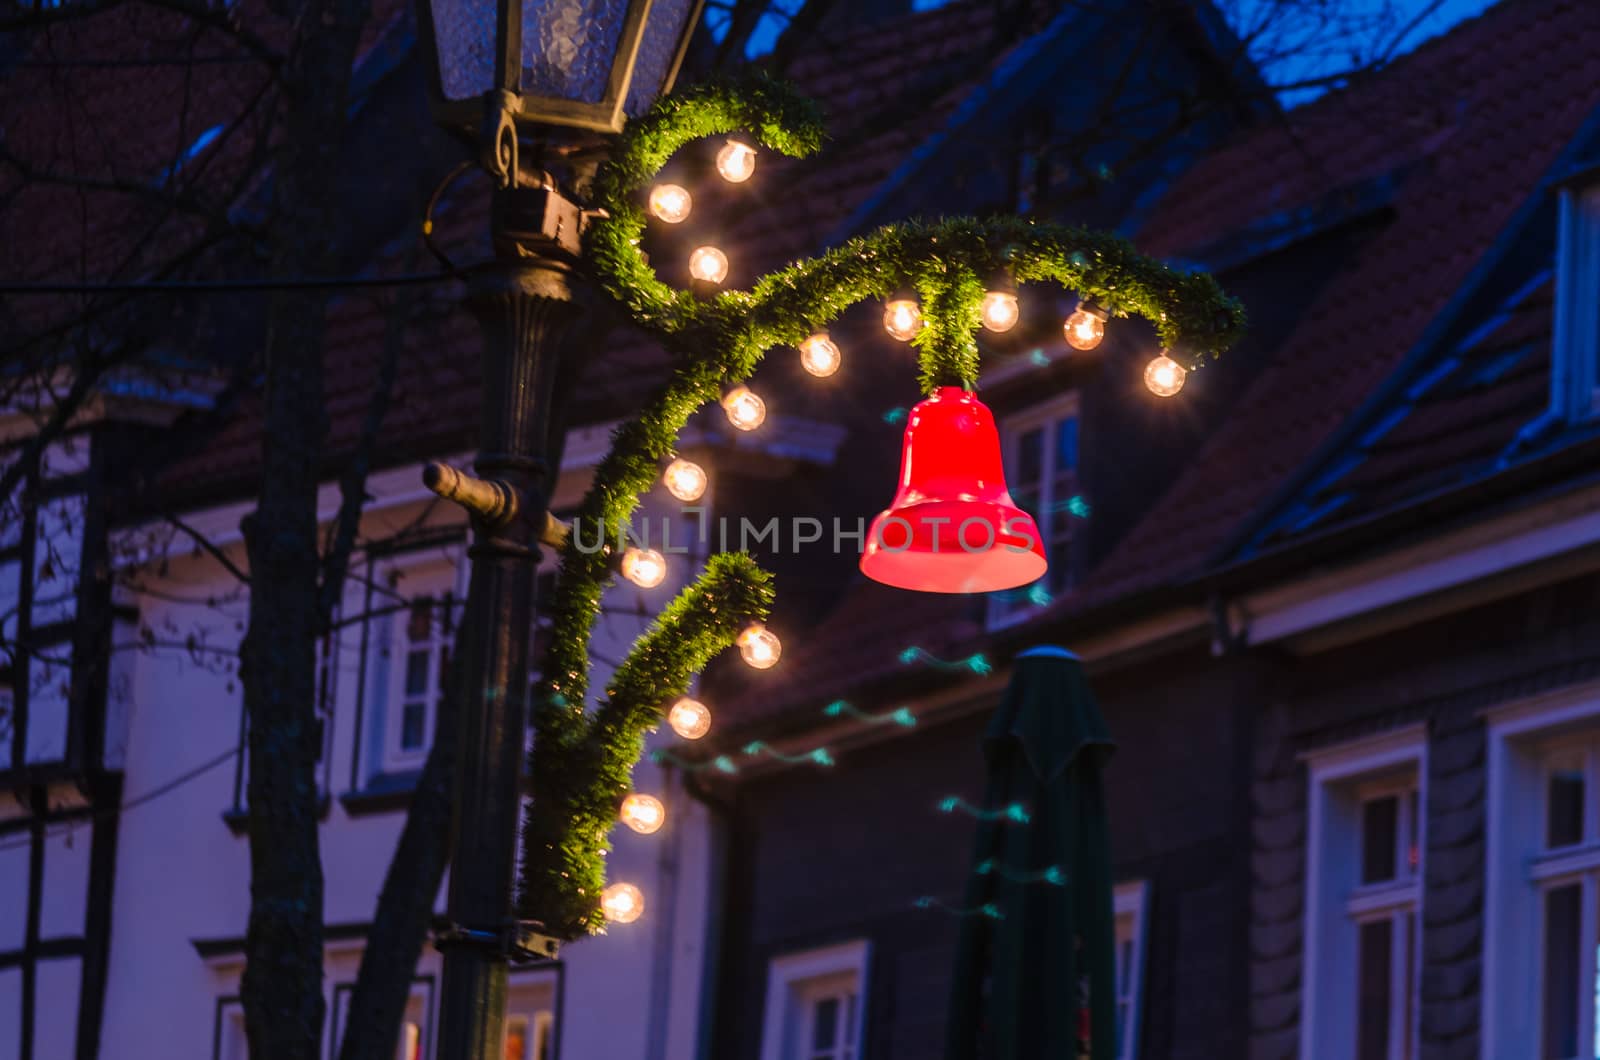 Decoration, Christmas market, by JFsPic